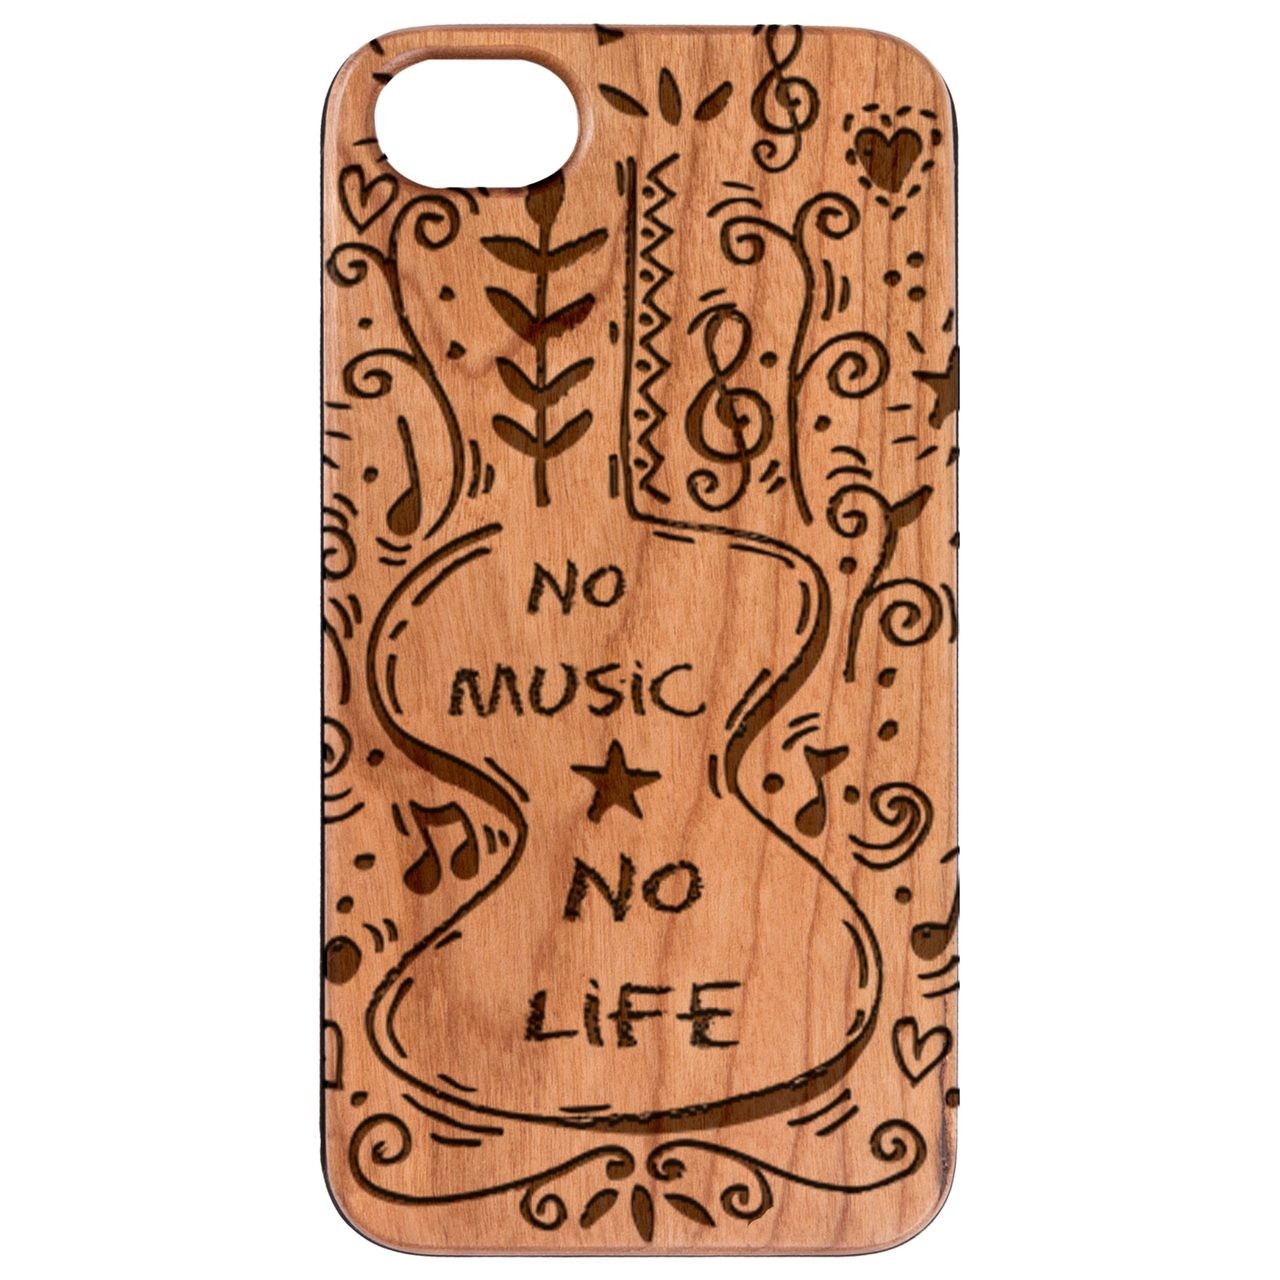  No Music No Life - Engraved - Wooden Phone Case - IPhone 13 Models